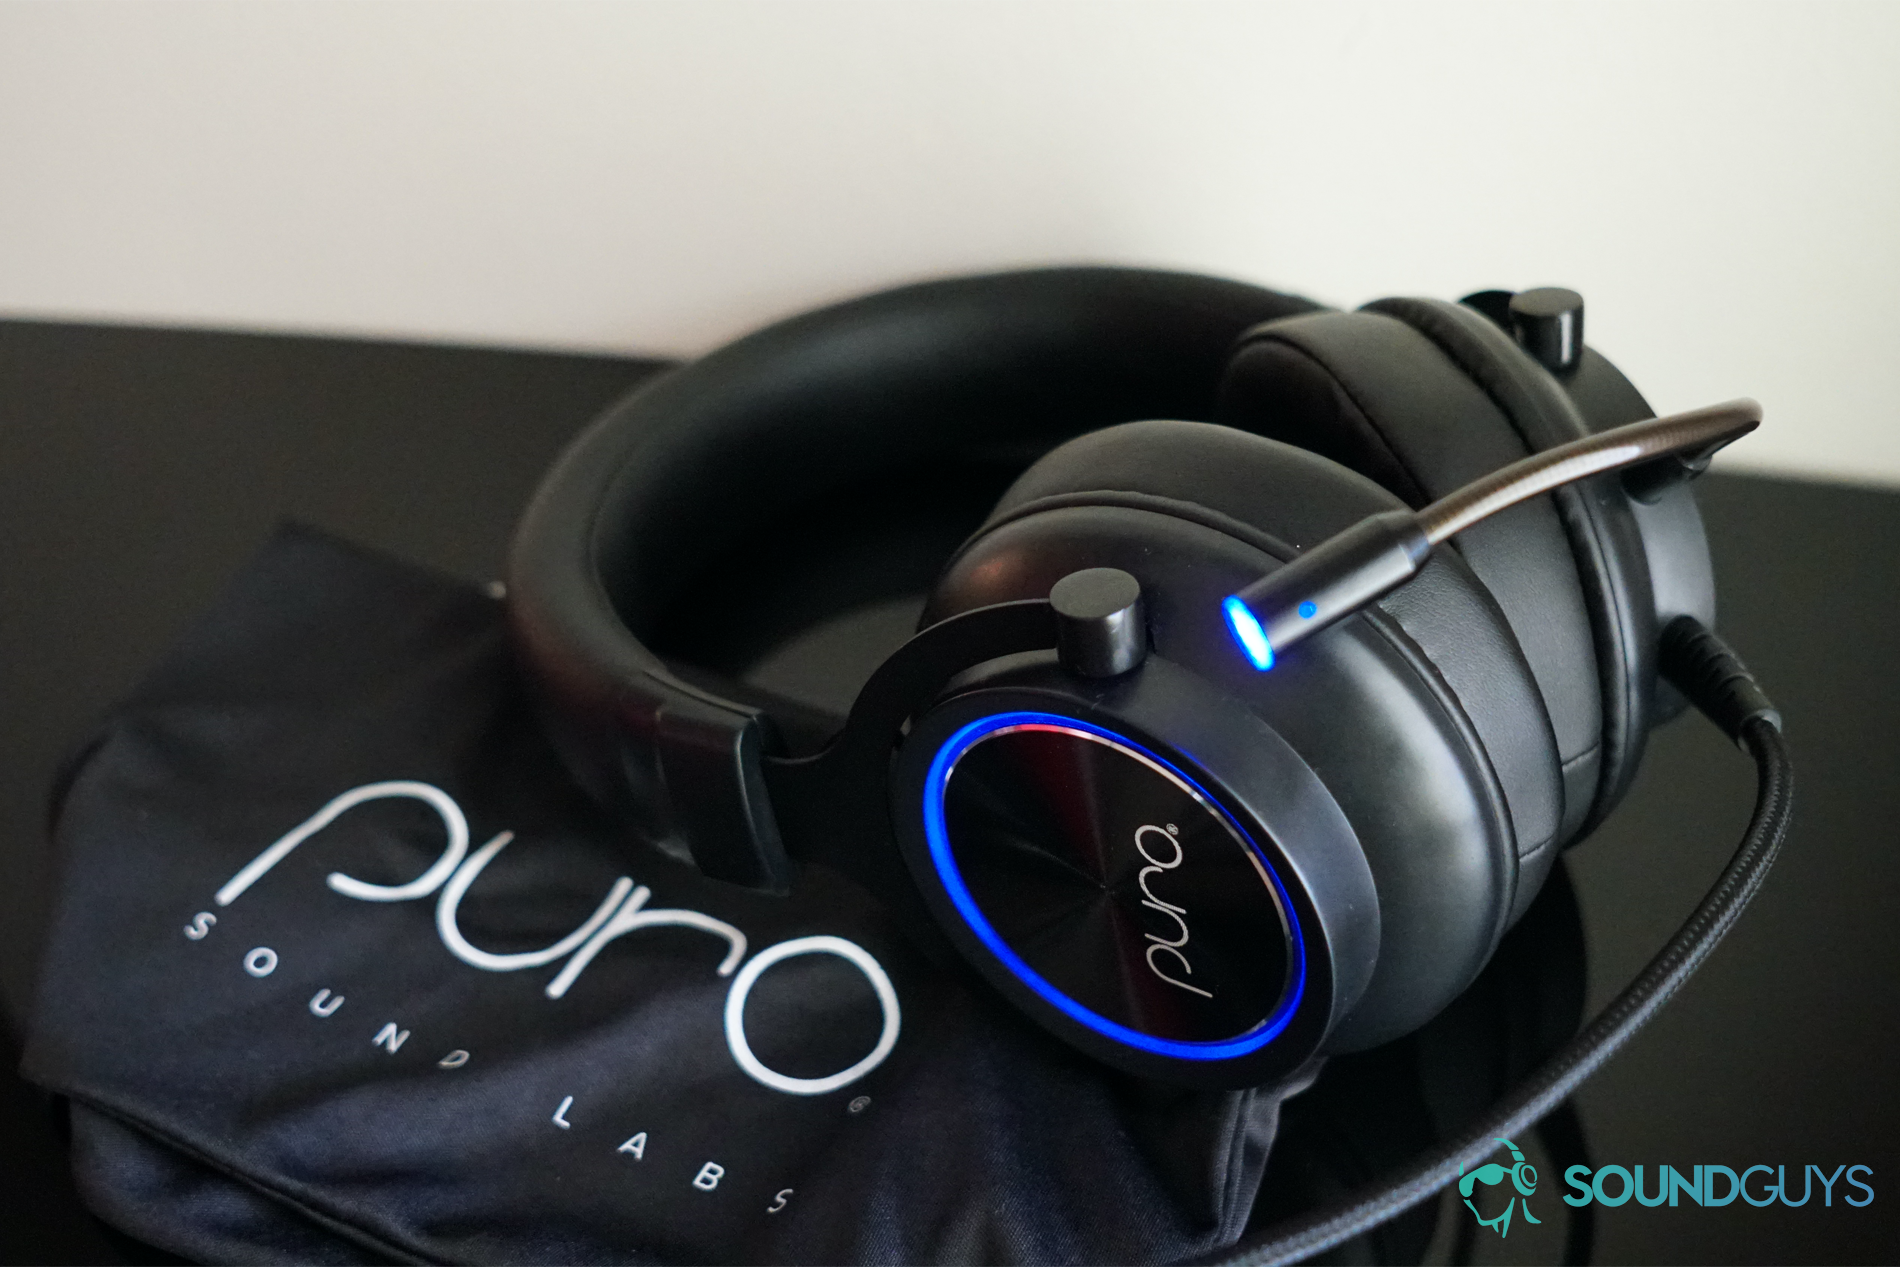 The Puro Sound Labs PuroGamer headset sits on top of its carry bag on a black surface, shown to address the question can headphones cause tinnitus.